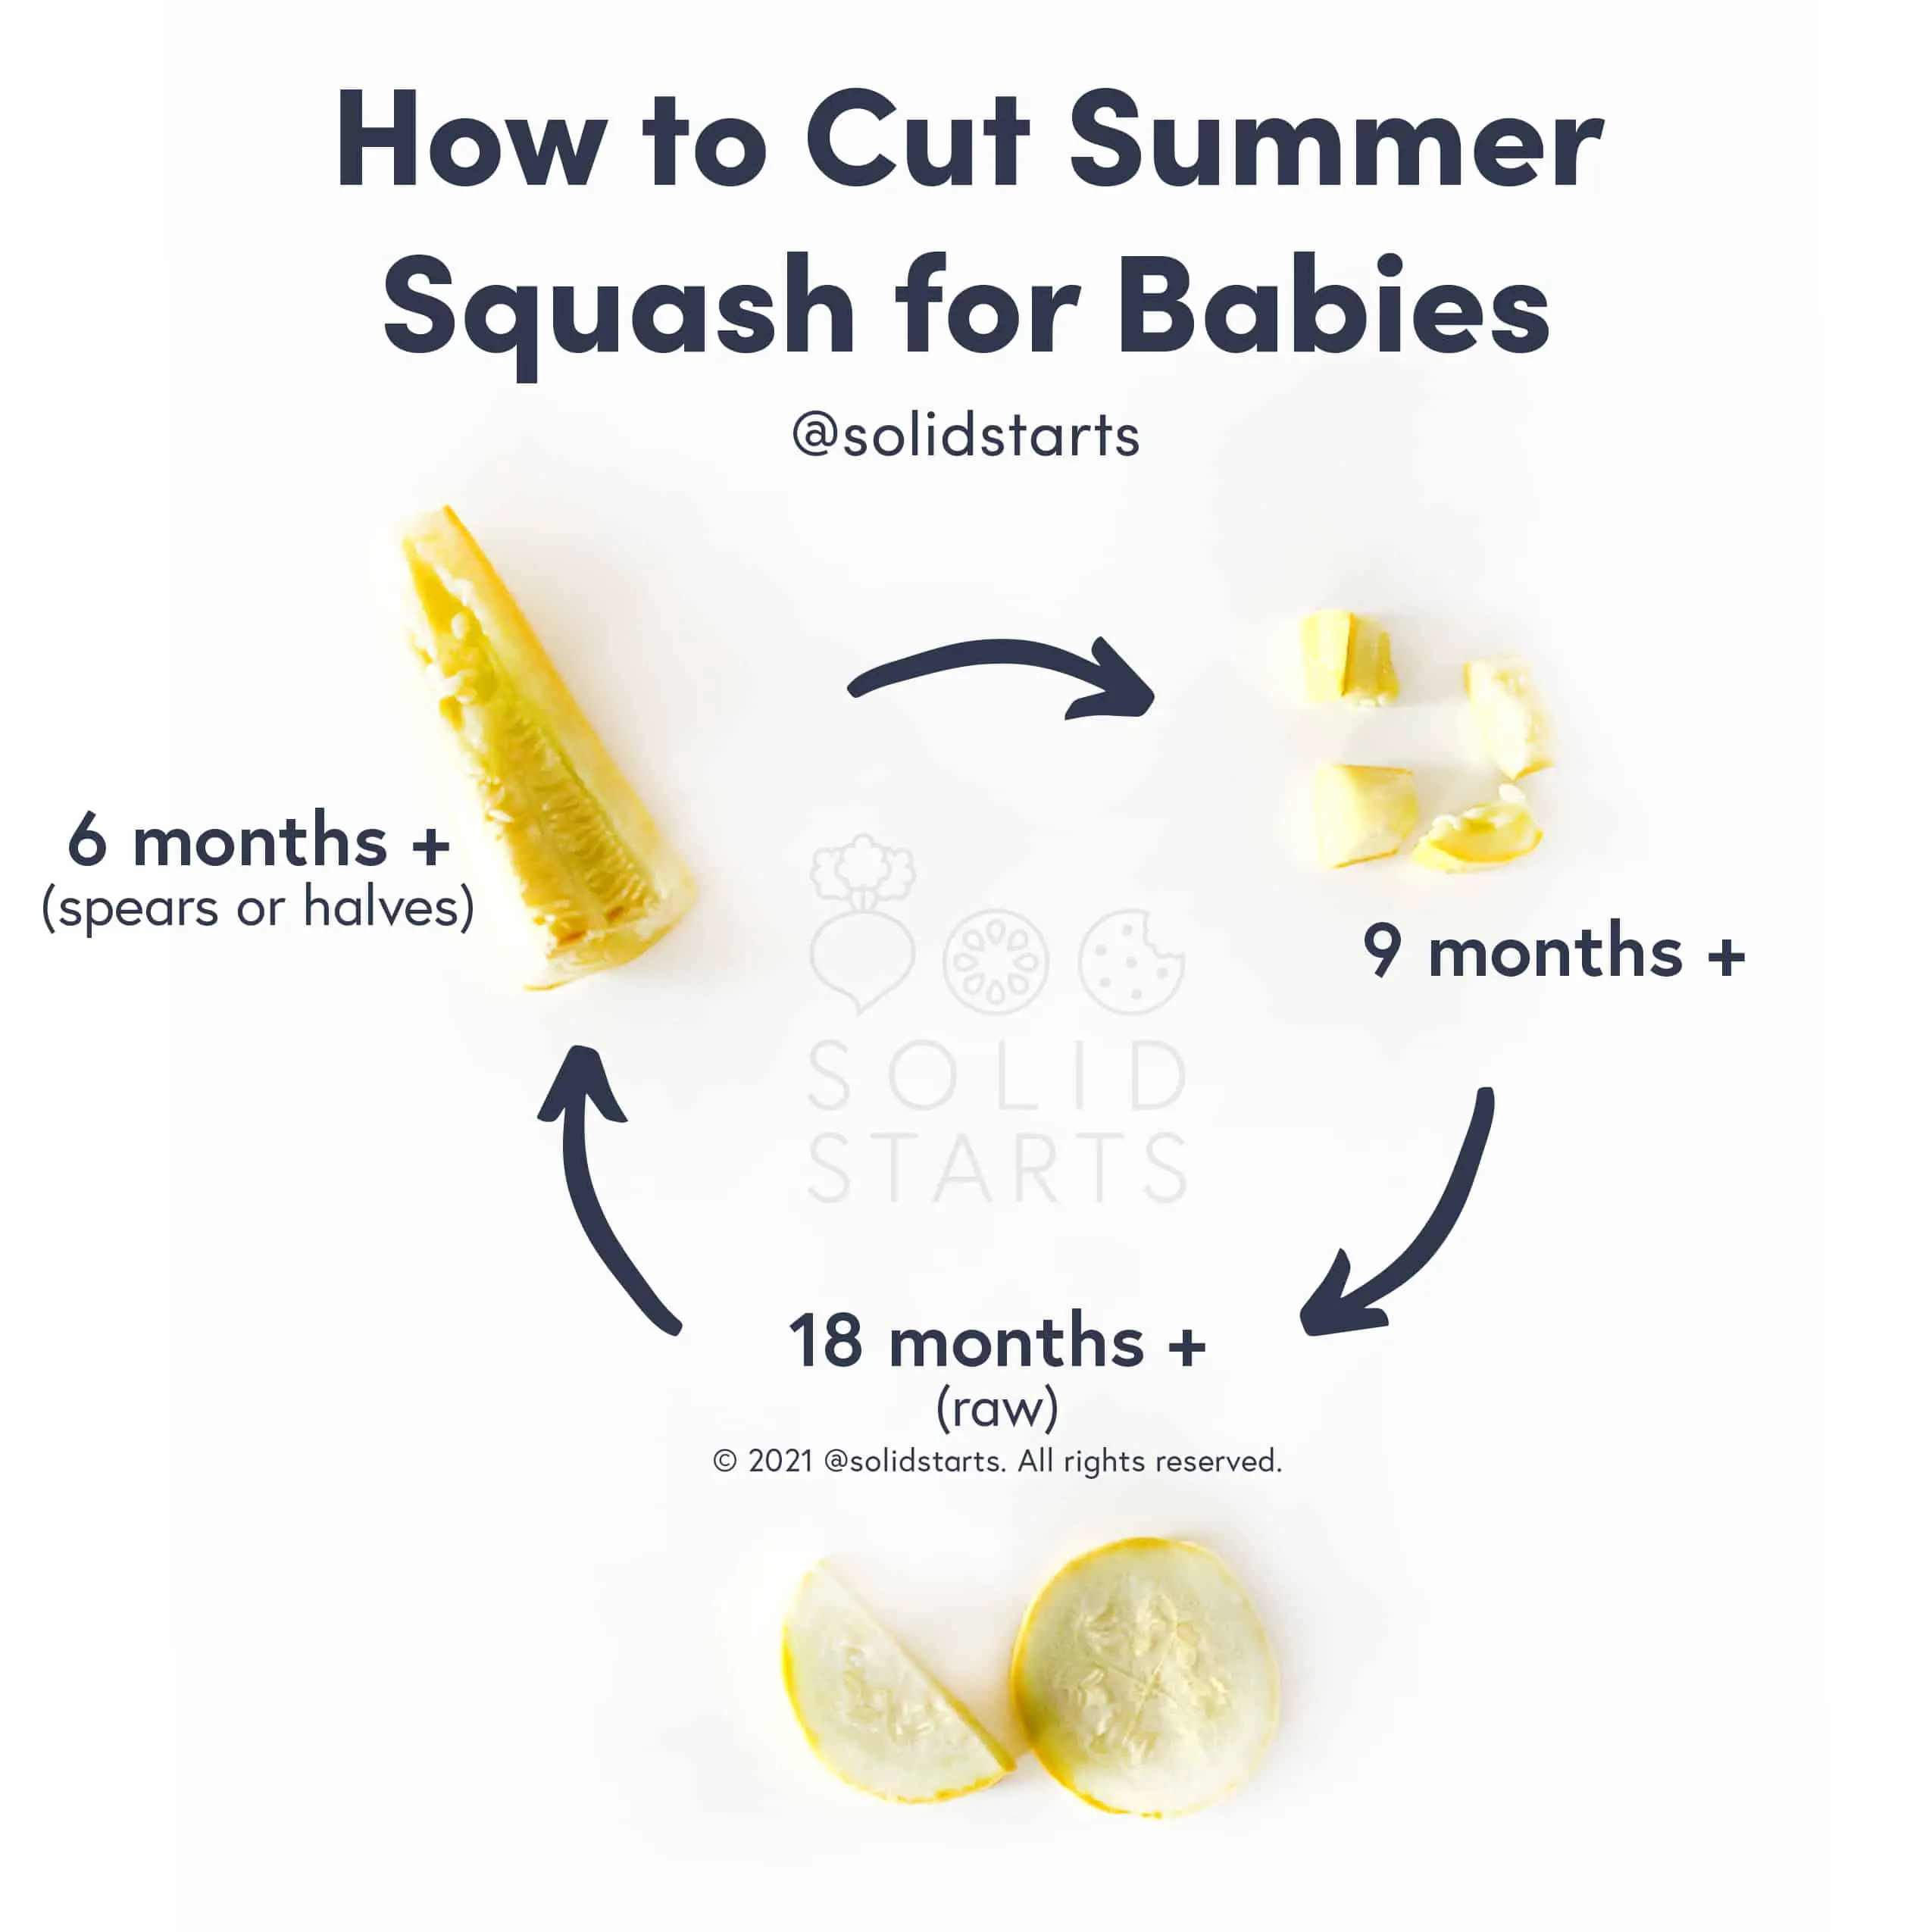 How To Make Yellow Squash Baby Food